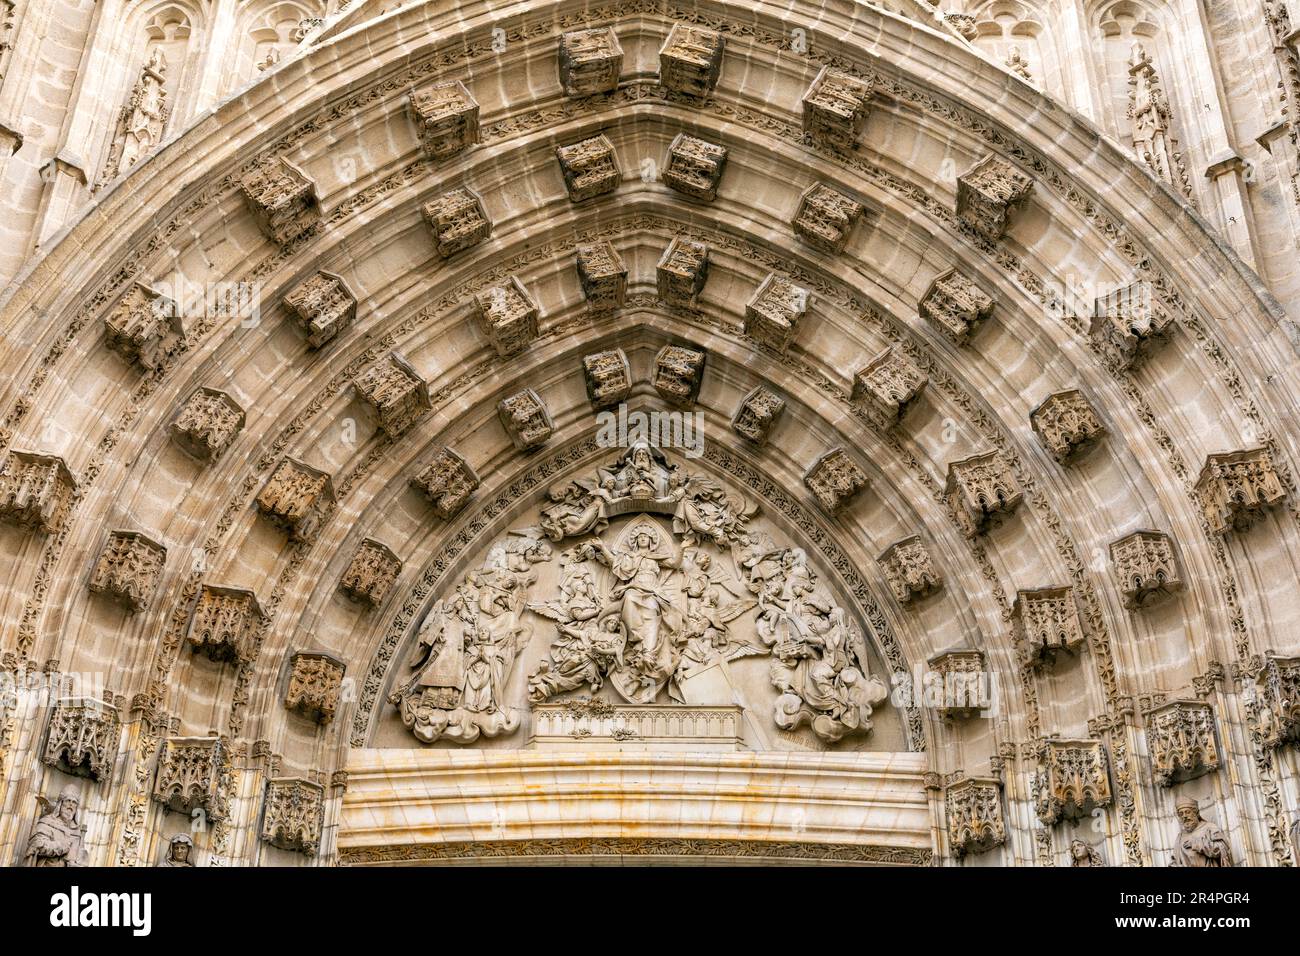 Spain, Seville, Seville Cathedral, Cathedral of Saint Mary of the See, completed in 16th century and is one of the largest churches in the world. Deta Stock Photo